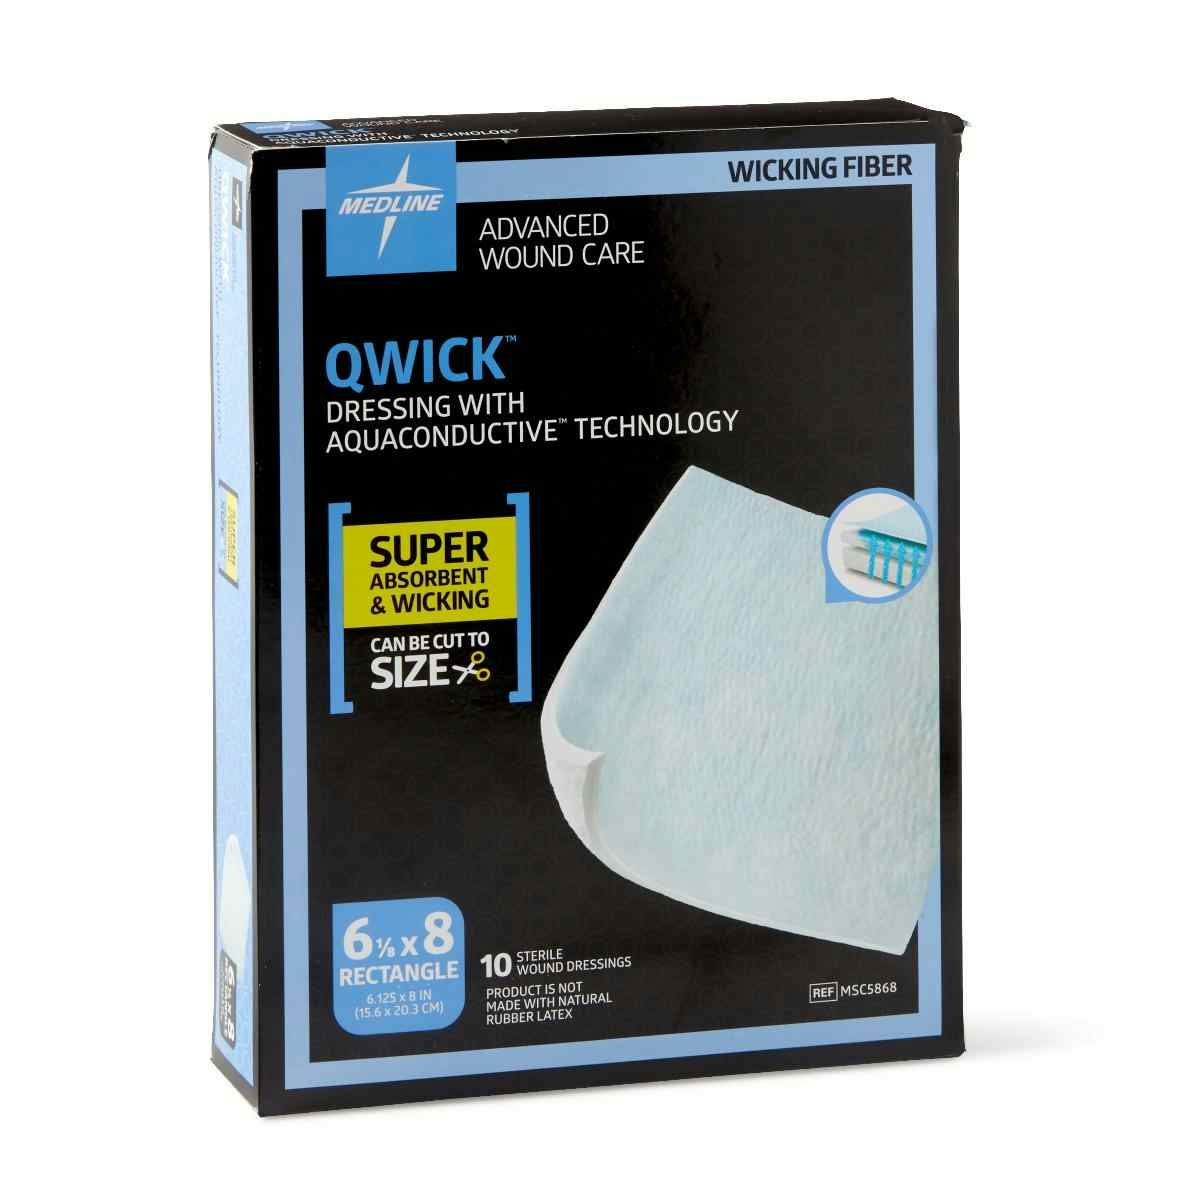 Medline Qwick Non-Adhesive Wound Dressing with Aquaconductive Technology, MSC5868Z, 6 1/8" X 8" - Box of 10